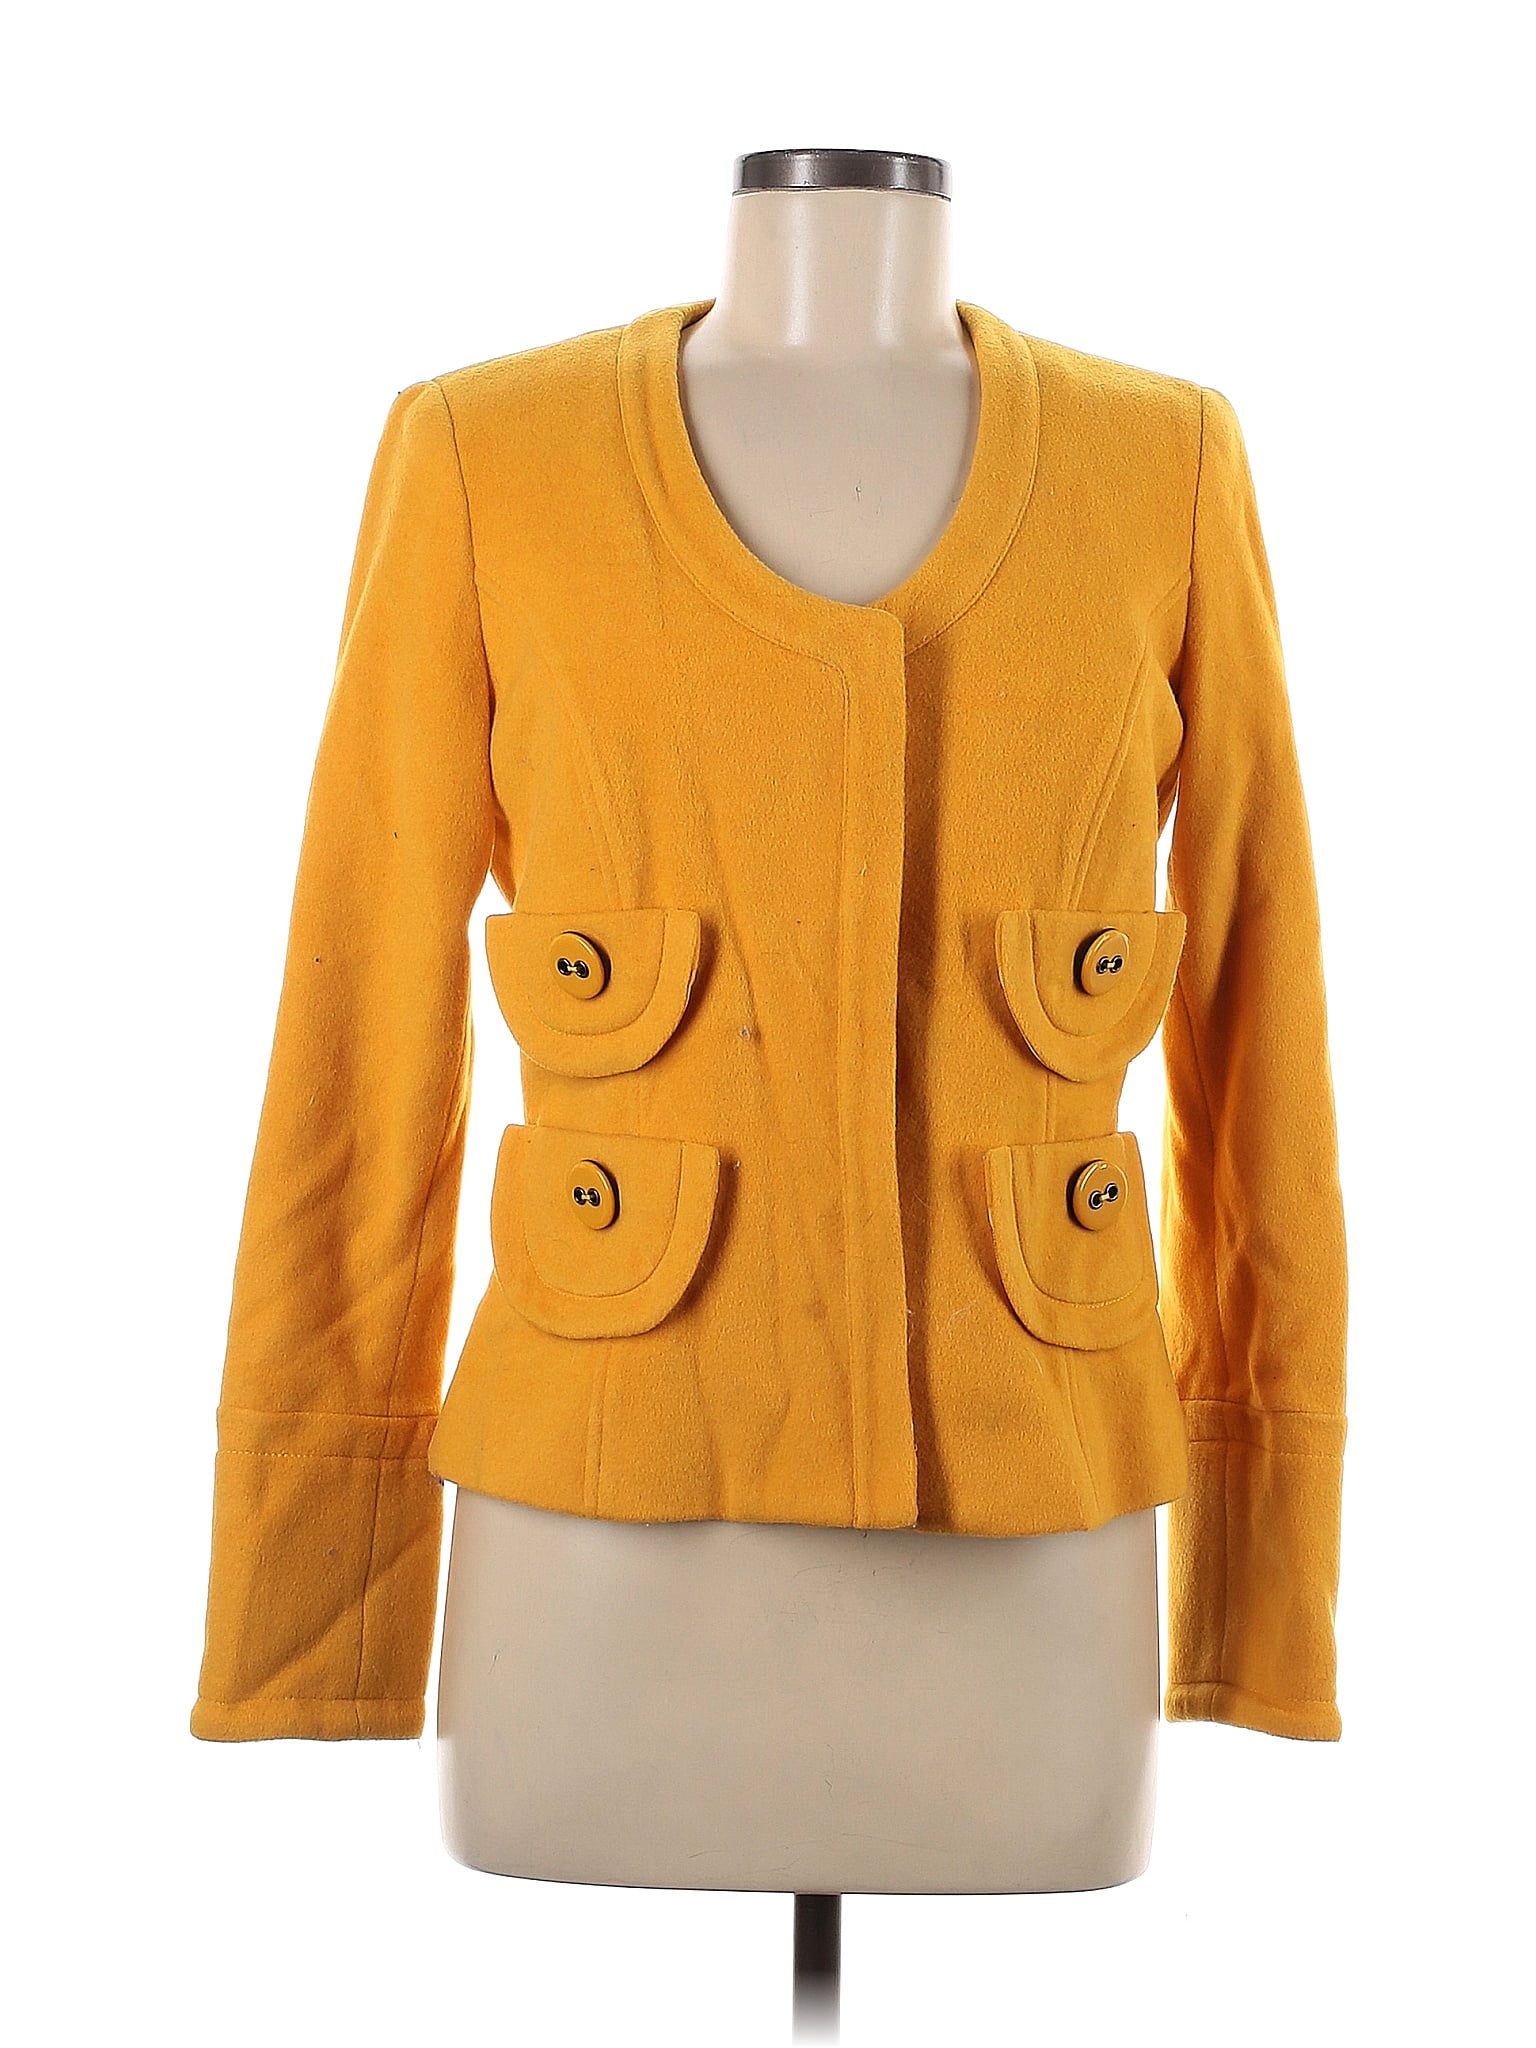 Etcetera Solid Yellow Wool Coat Size 6 - 80% off | thredUP